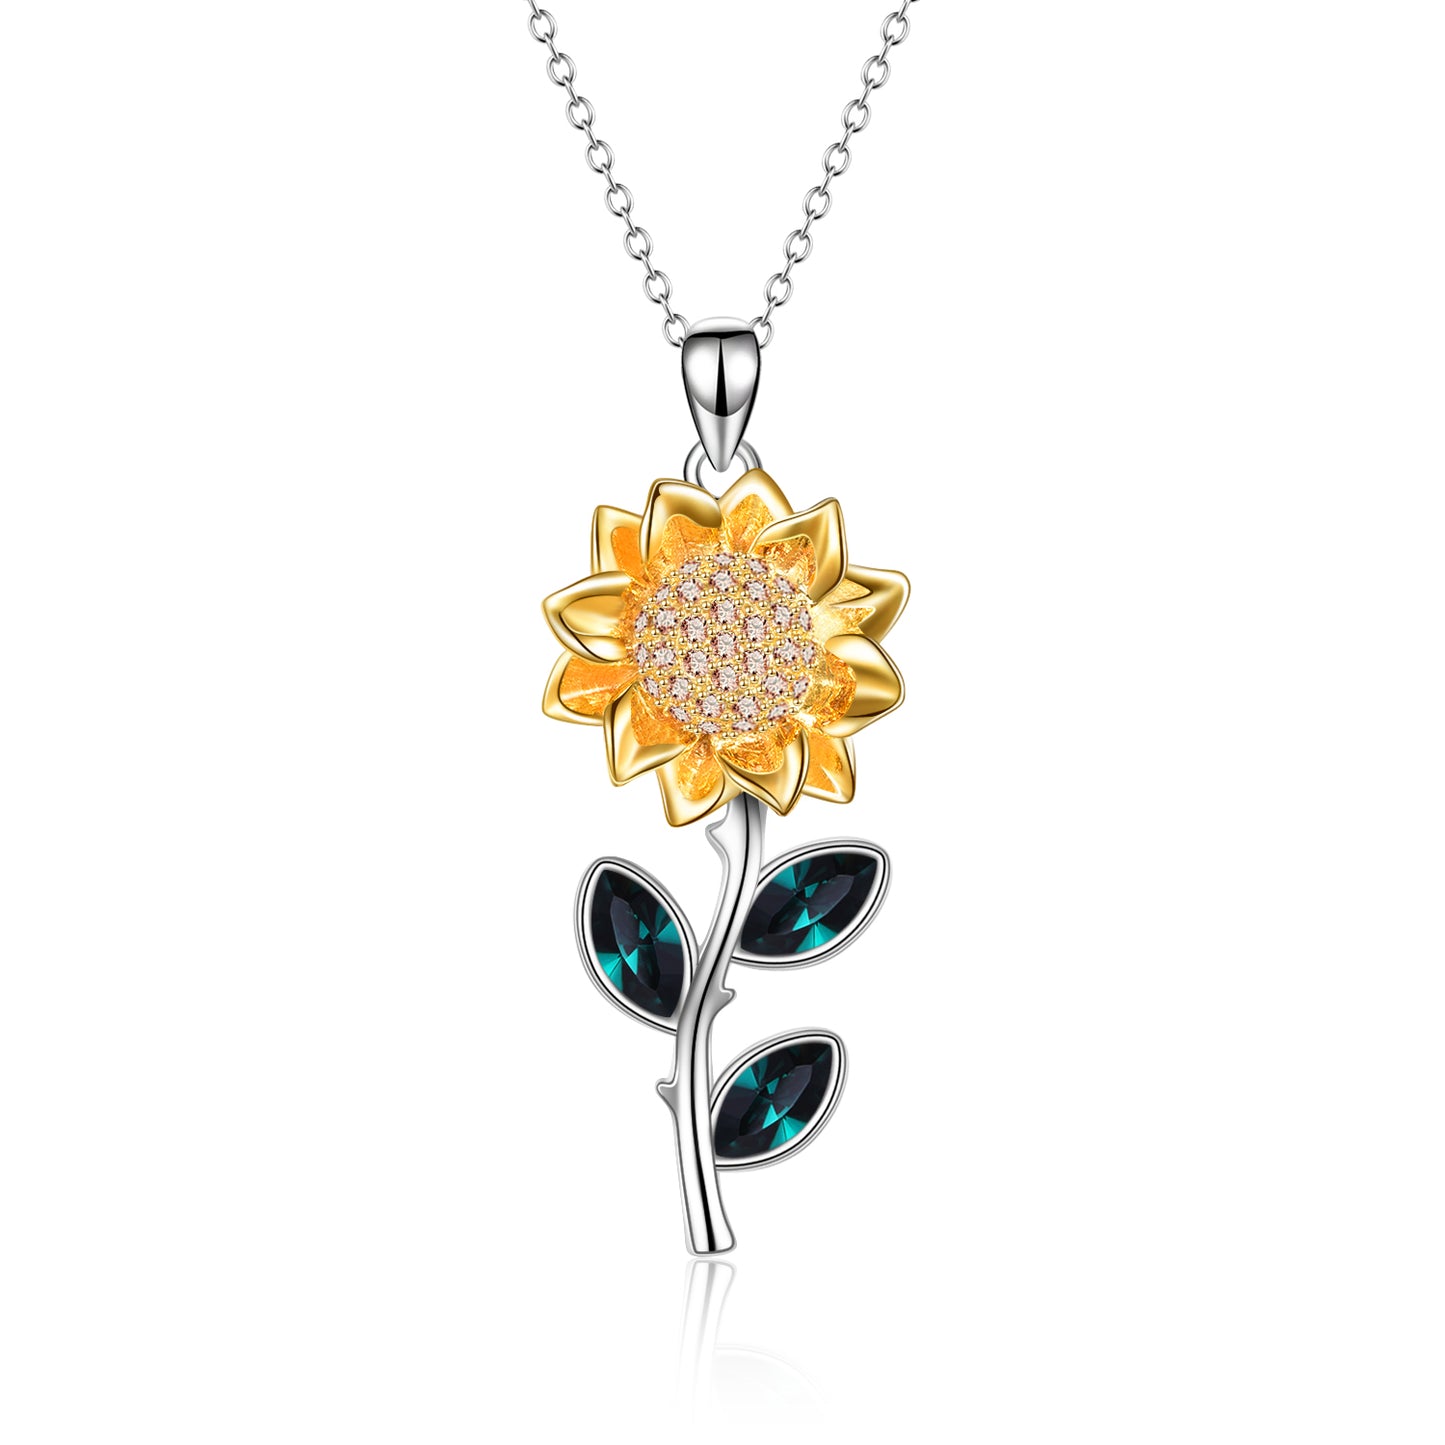 Sterling Silver Sunflower Crystal Pendant w/ Rolo Chain Necklace